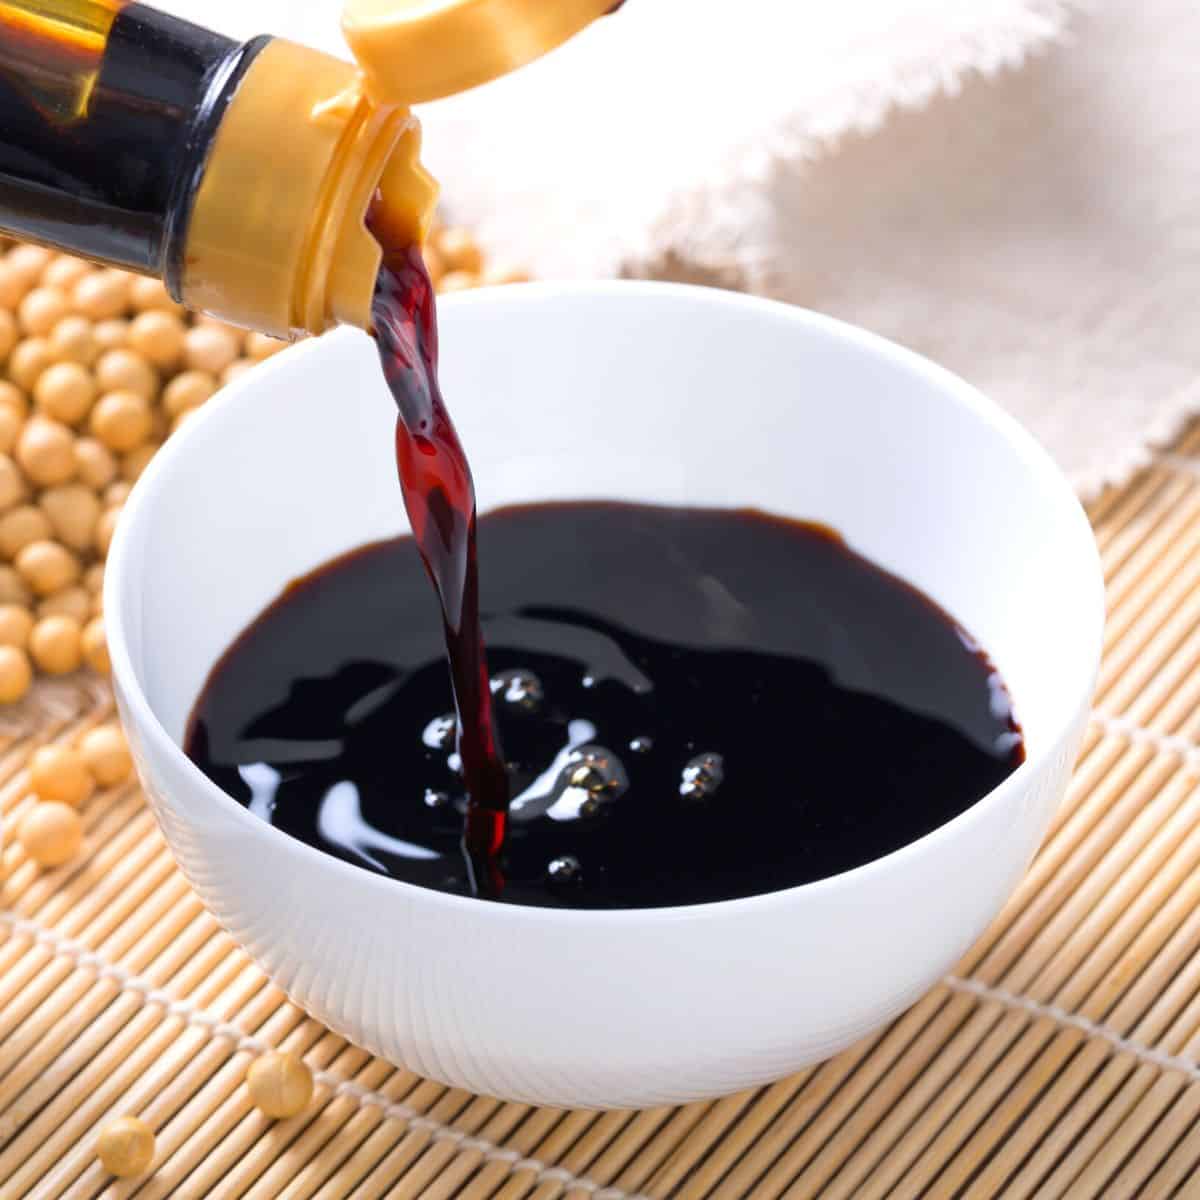 soy sauce poured into a small white bowl